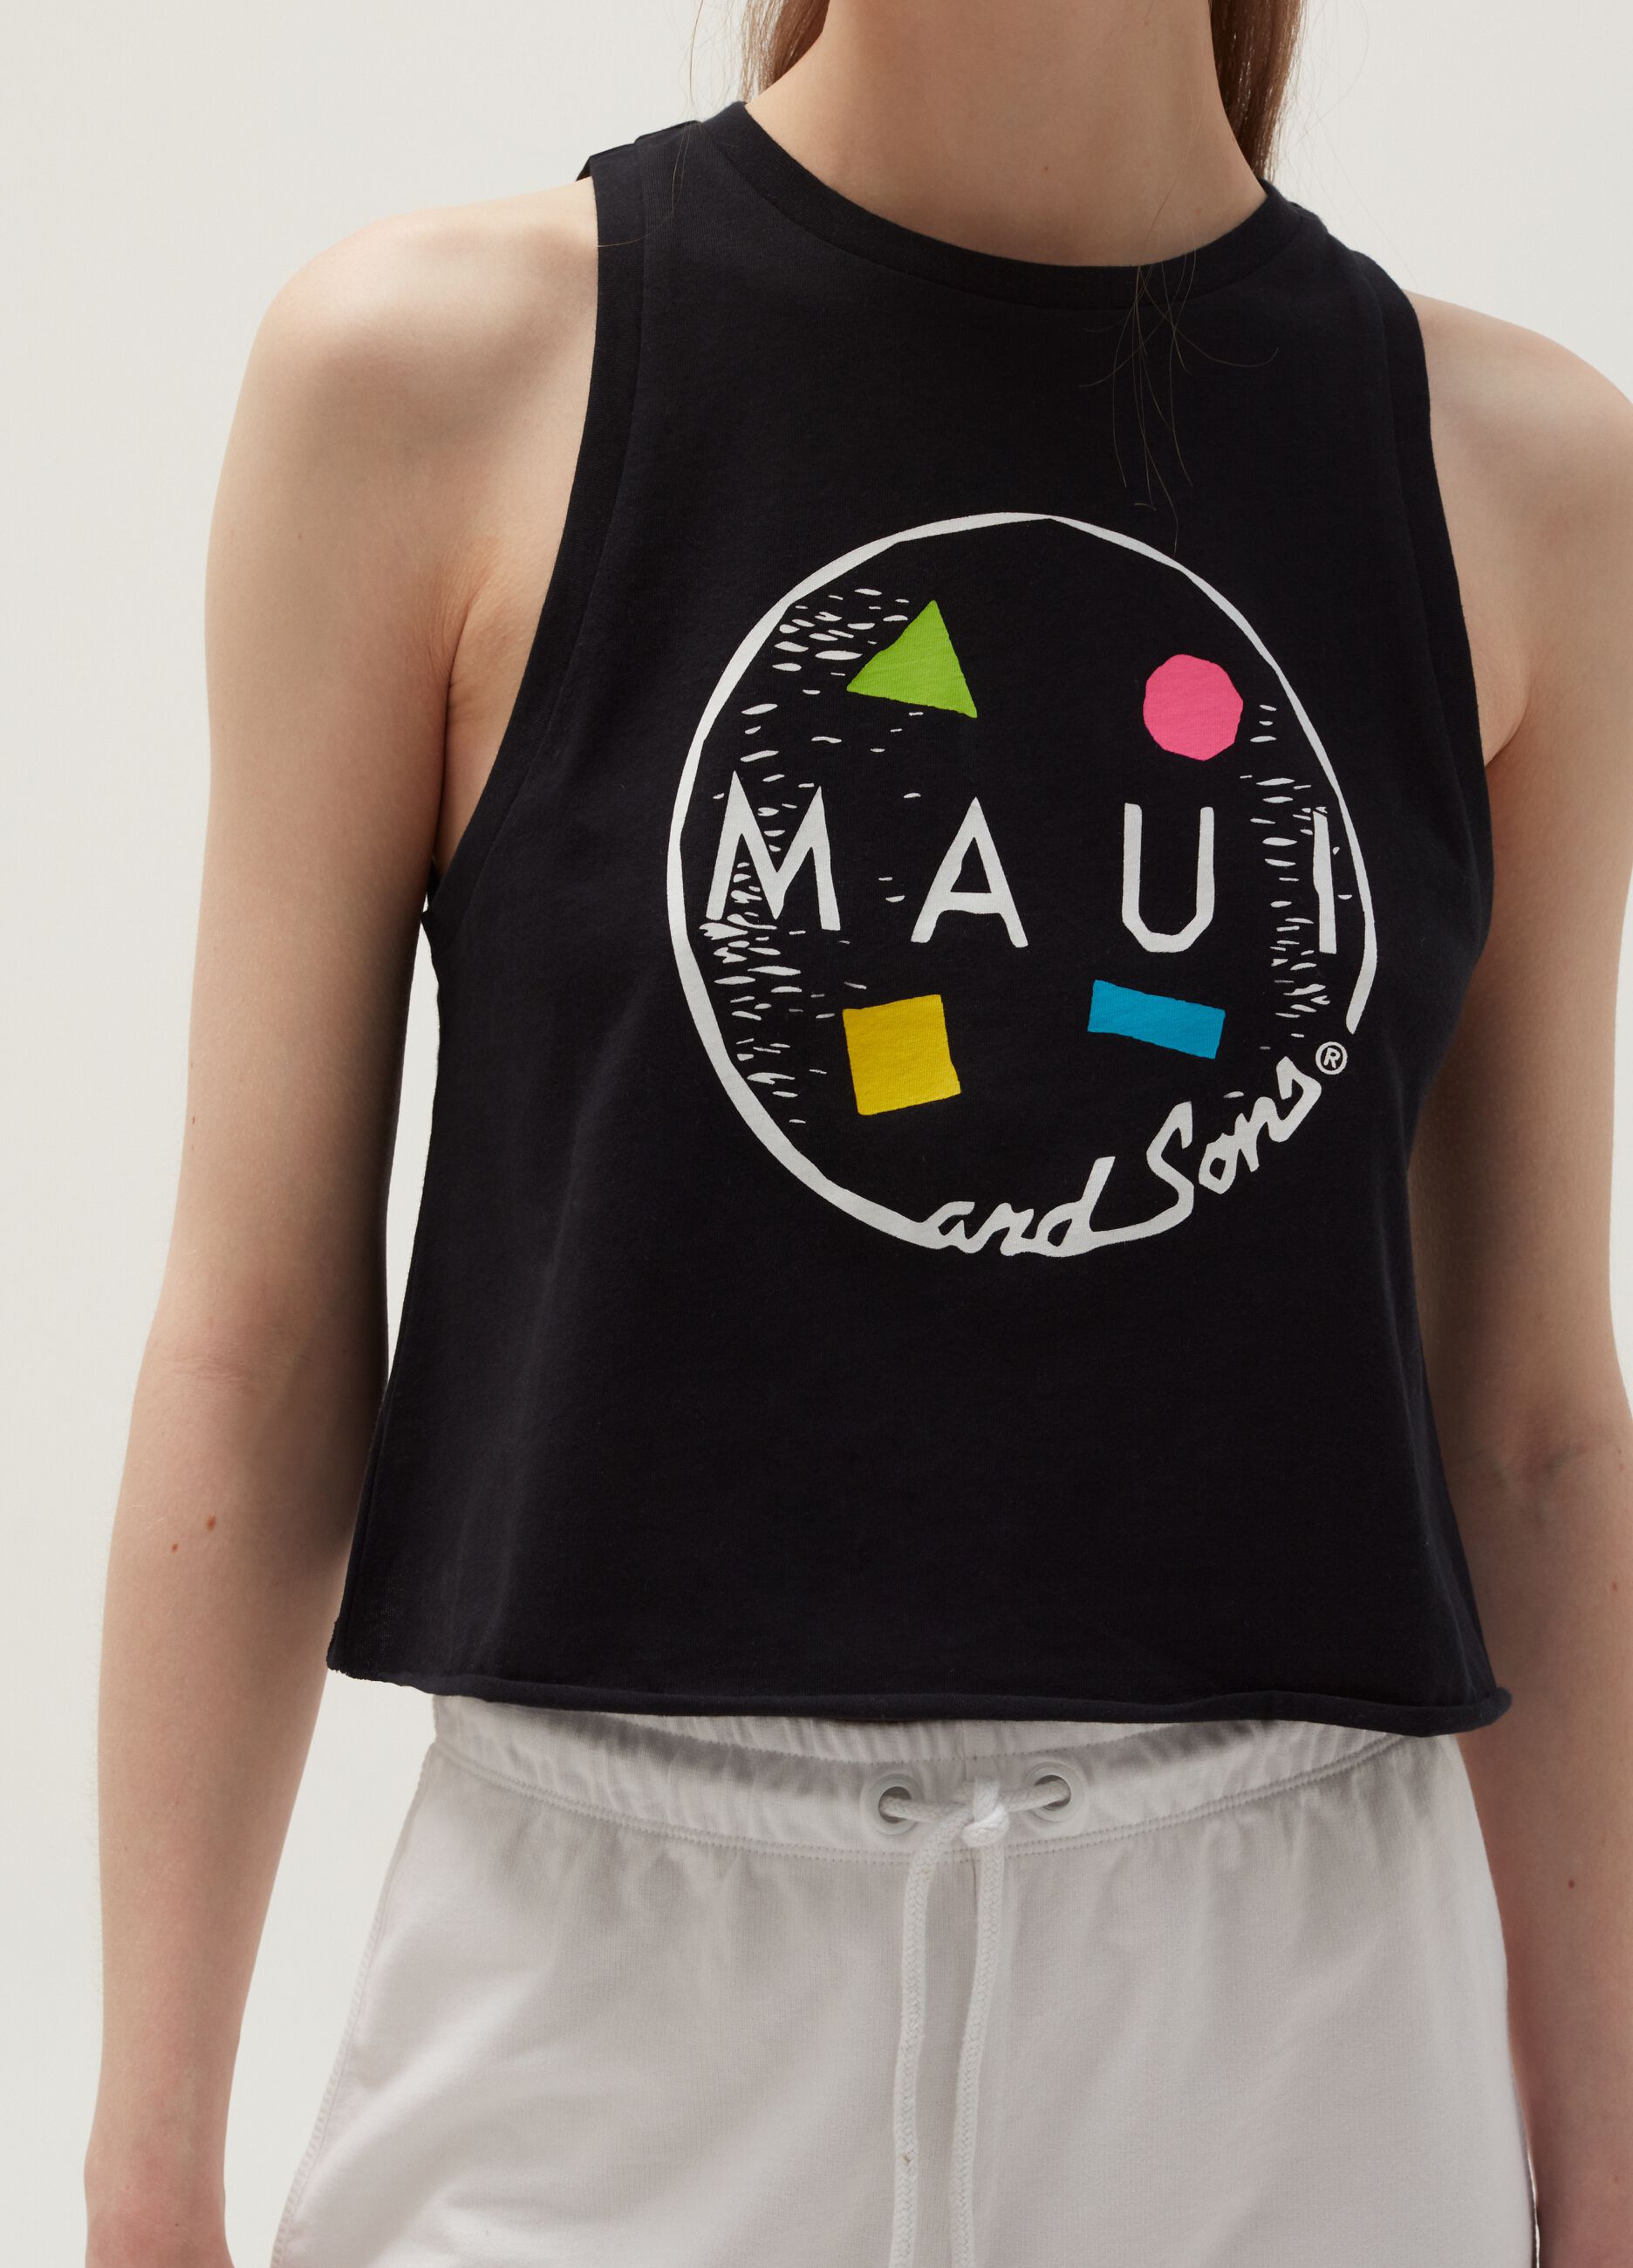 Cotton tank top with print by Maui and Sons